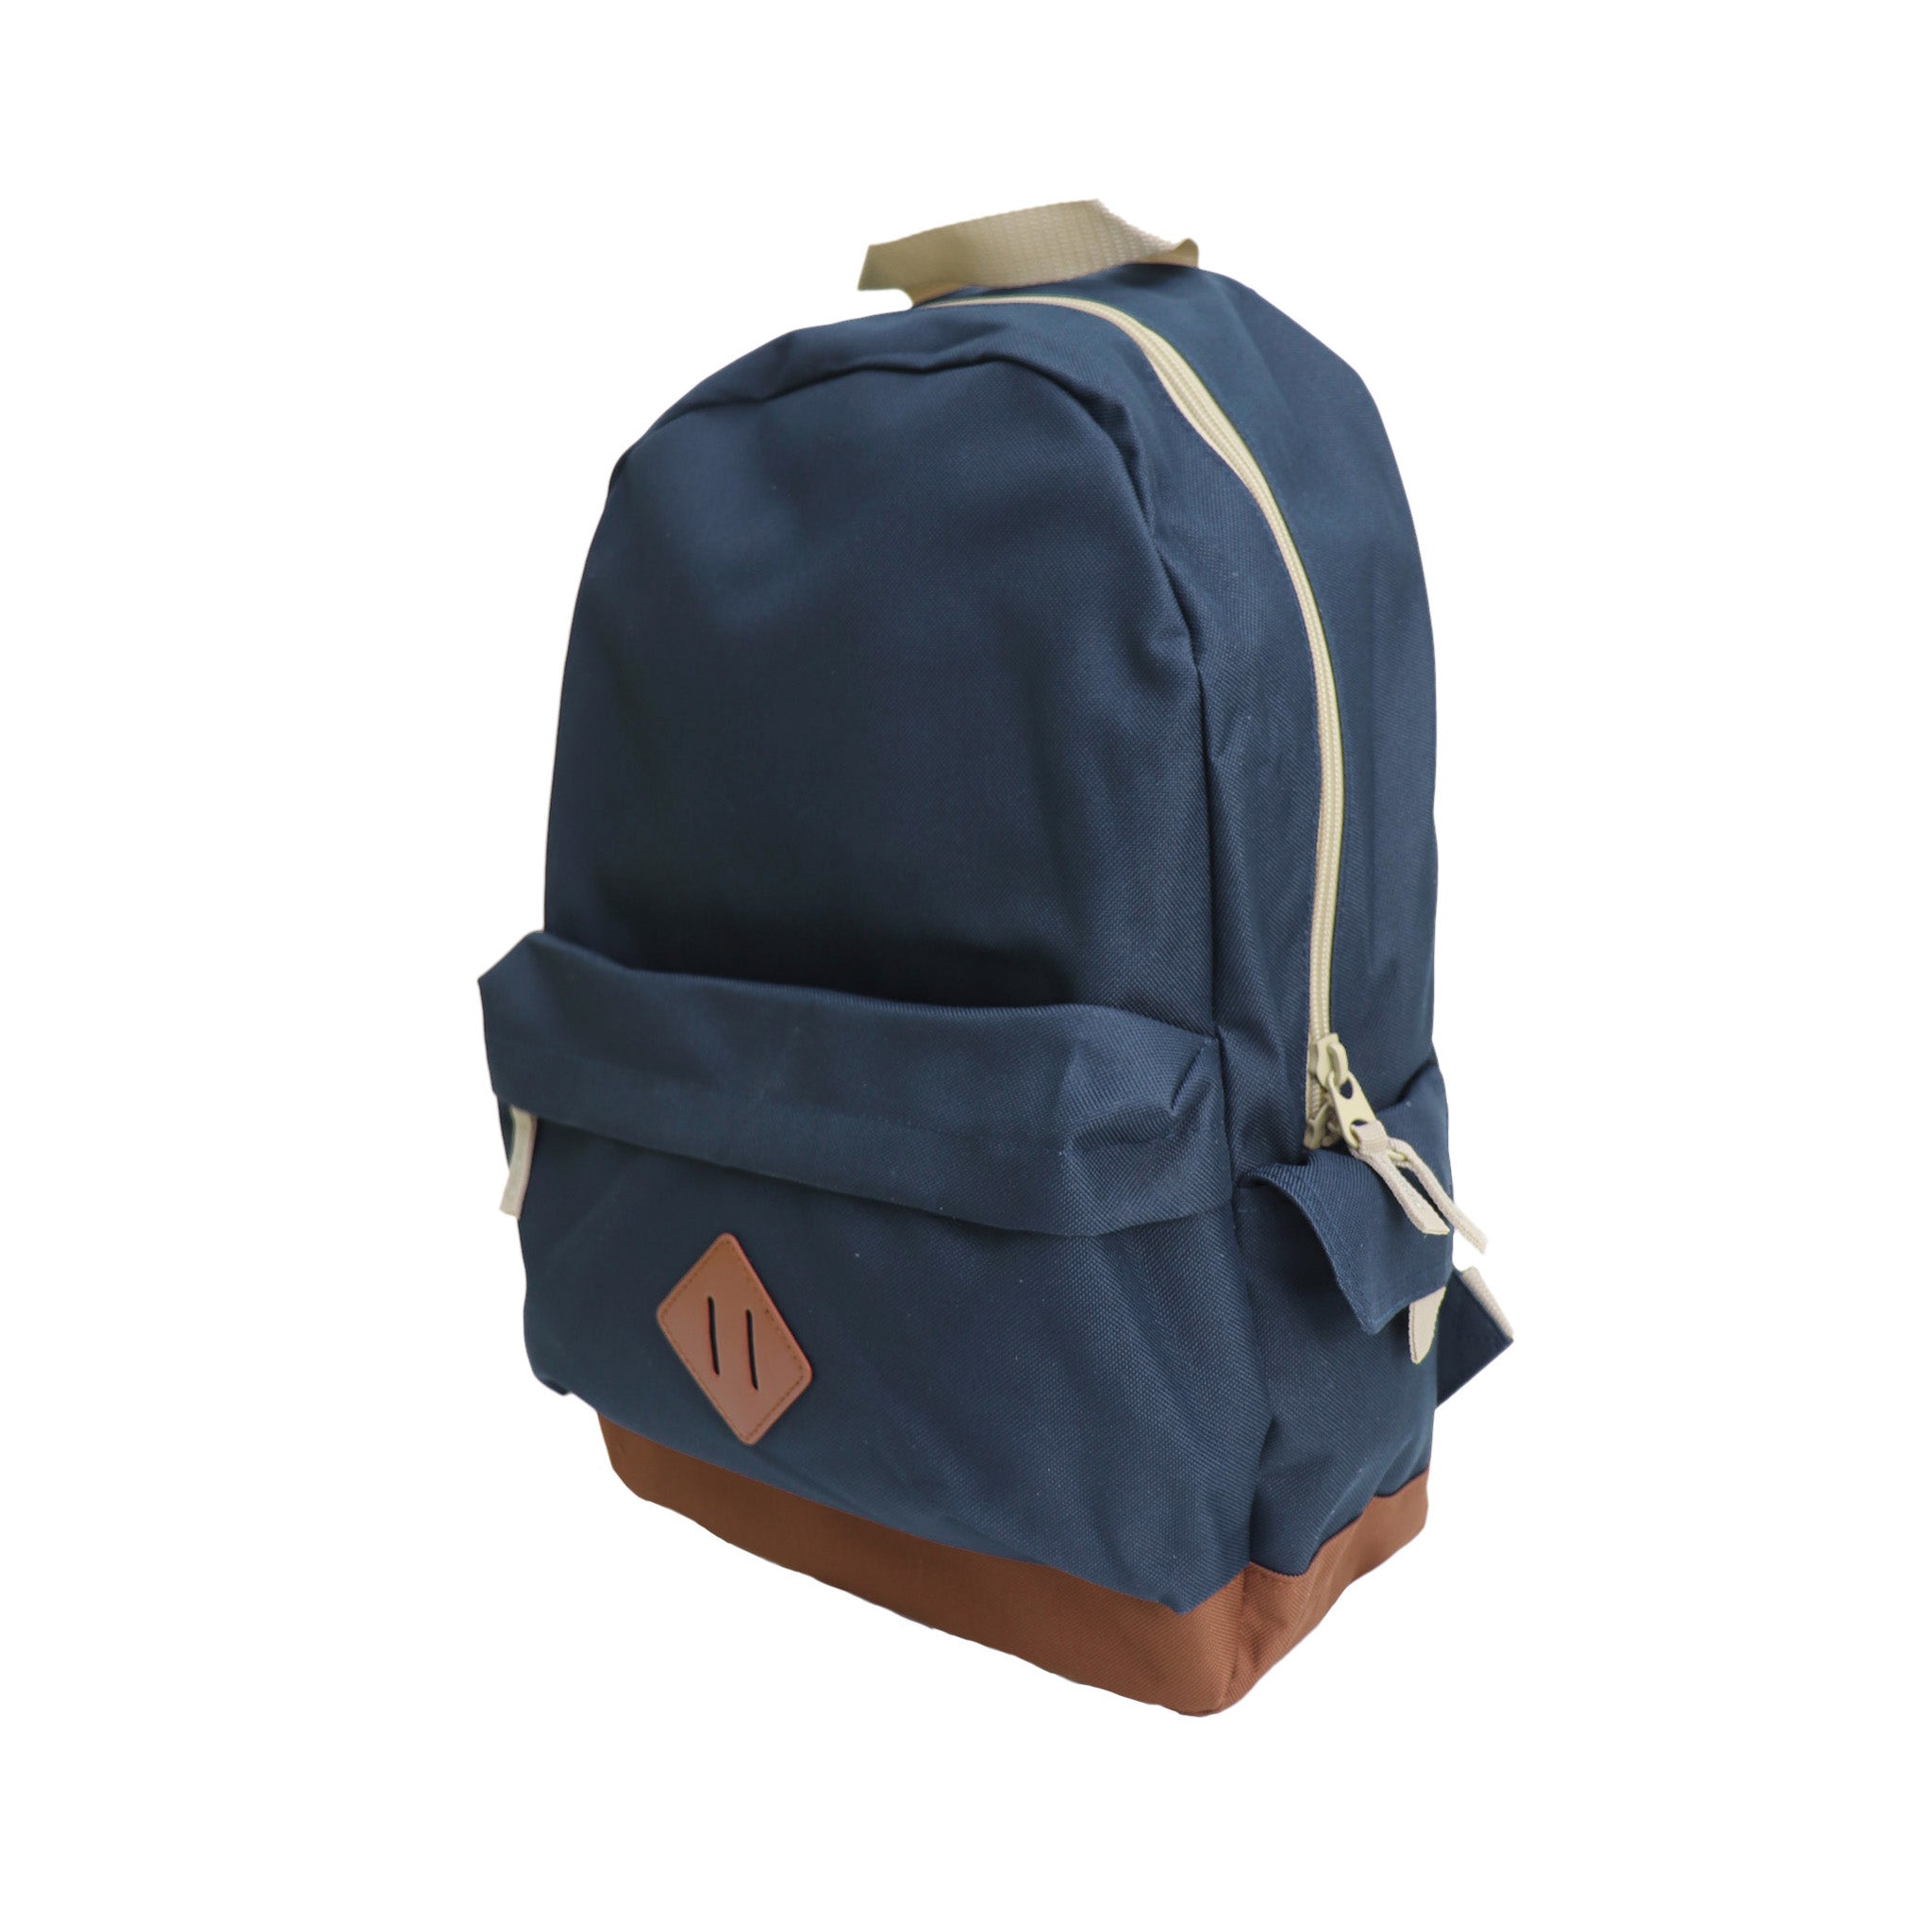 "THE" Backpack